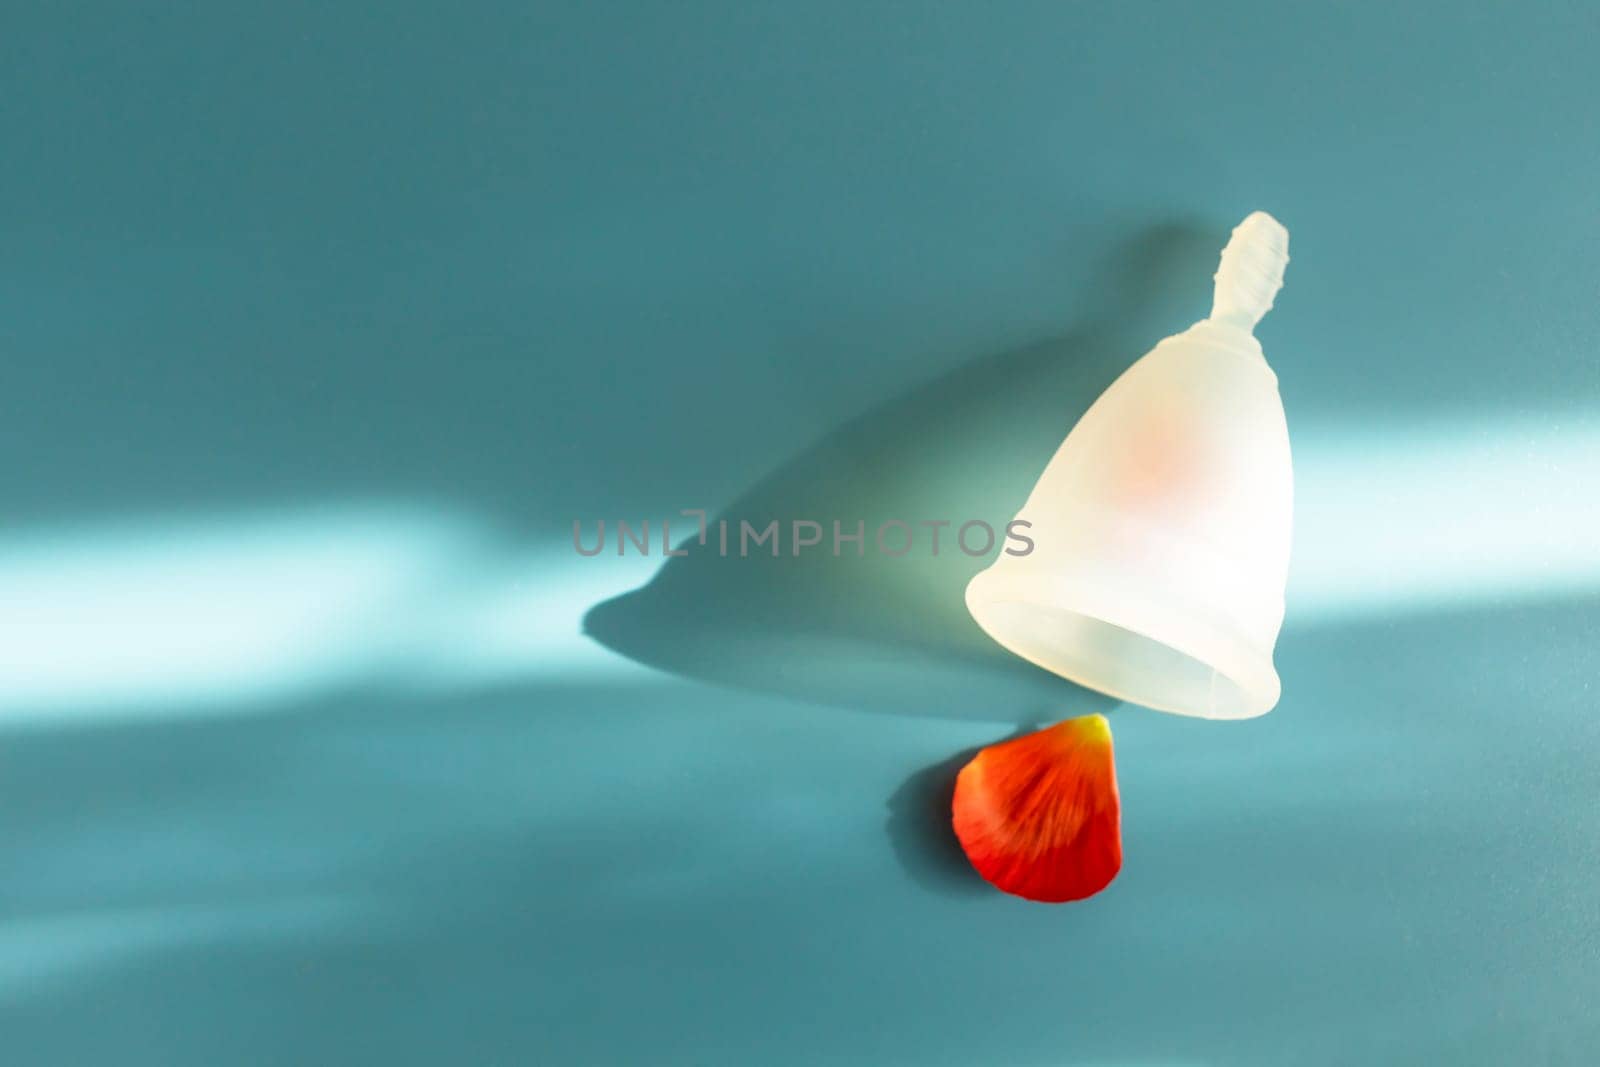 Mockup Menstrual Cup And Red Flower Petal On Blue Backdrop, Background with Shadow, Copy Space, World Menstrual Hygiene Day On May, 28. Horizontal Plane, Design.